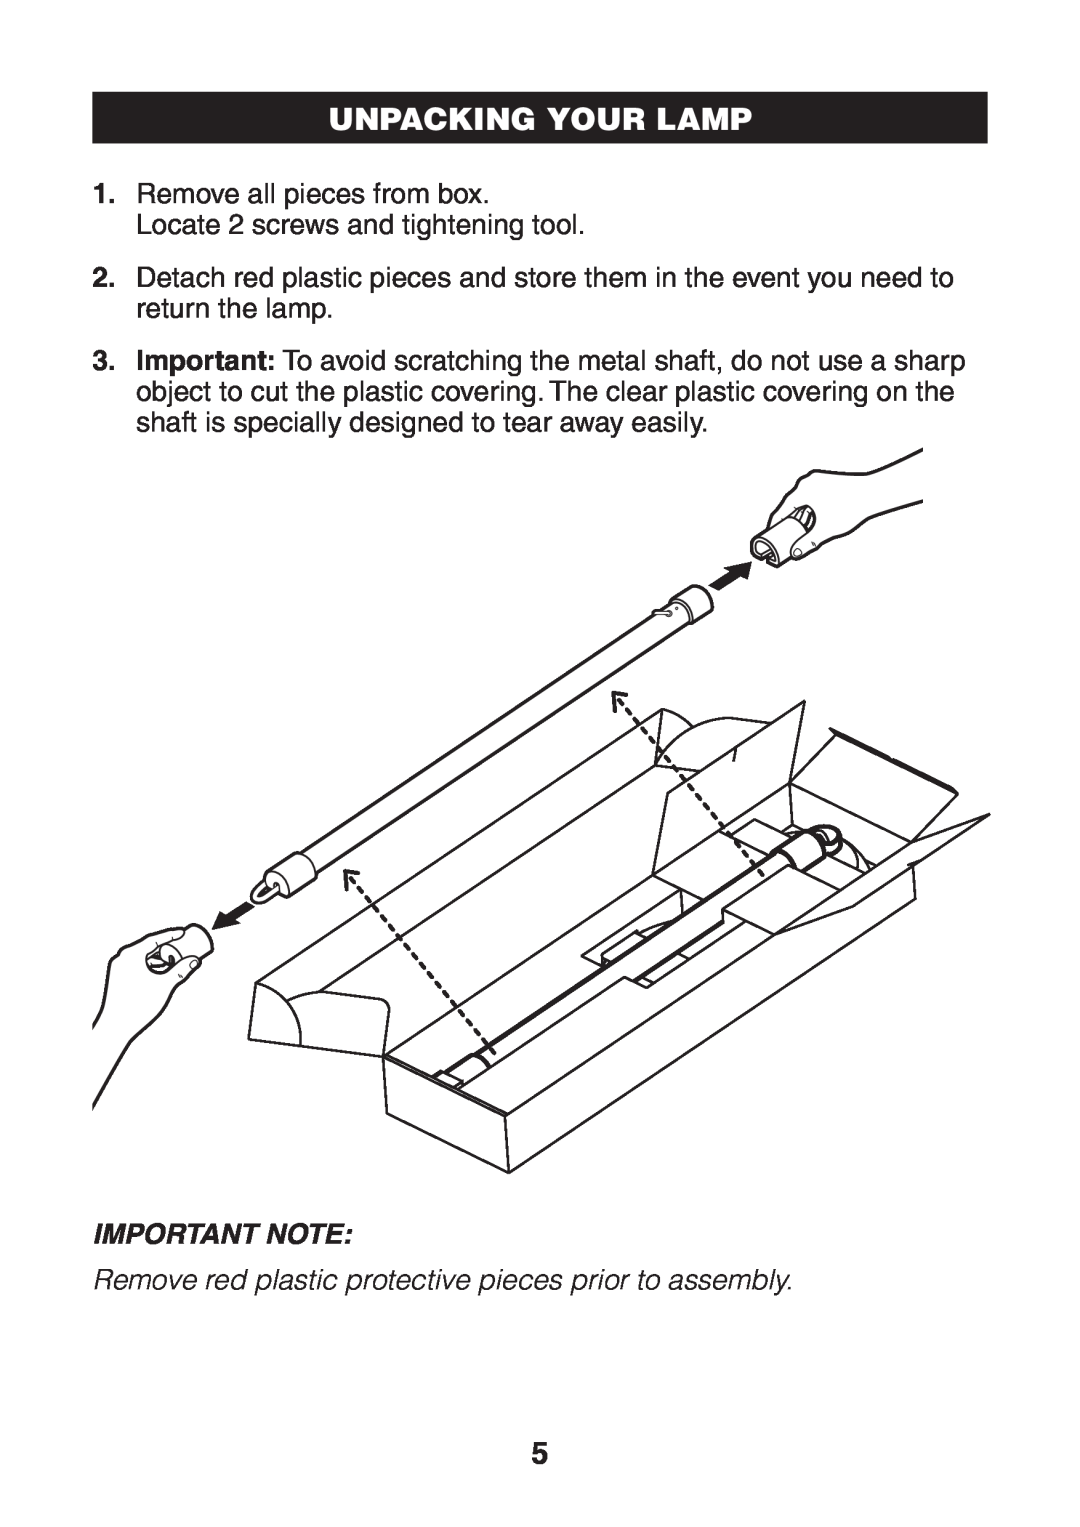 Verilux VF01 manual Unpacking Your Lamp, Remove red plastic protective pieces prior to assembly, Important Note 